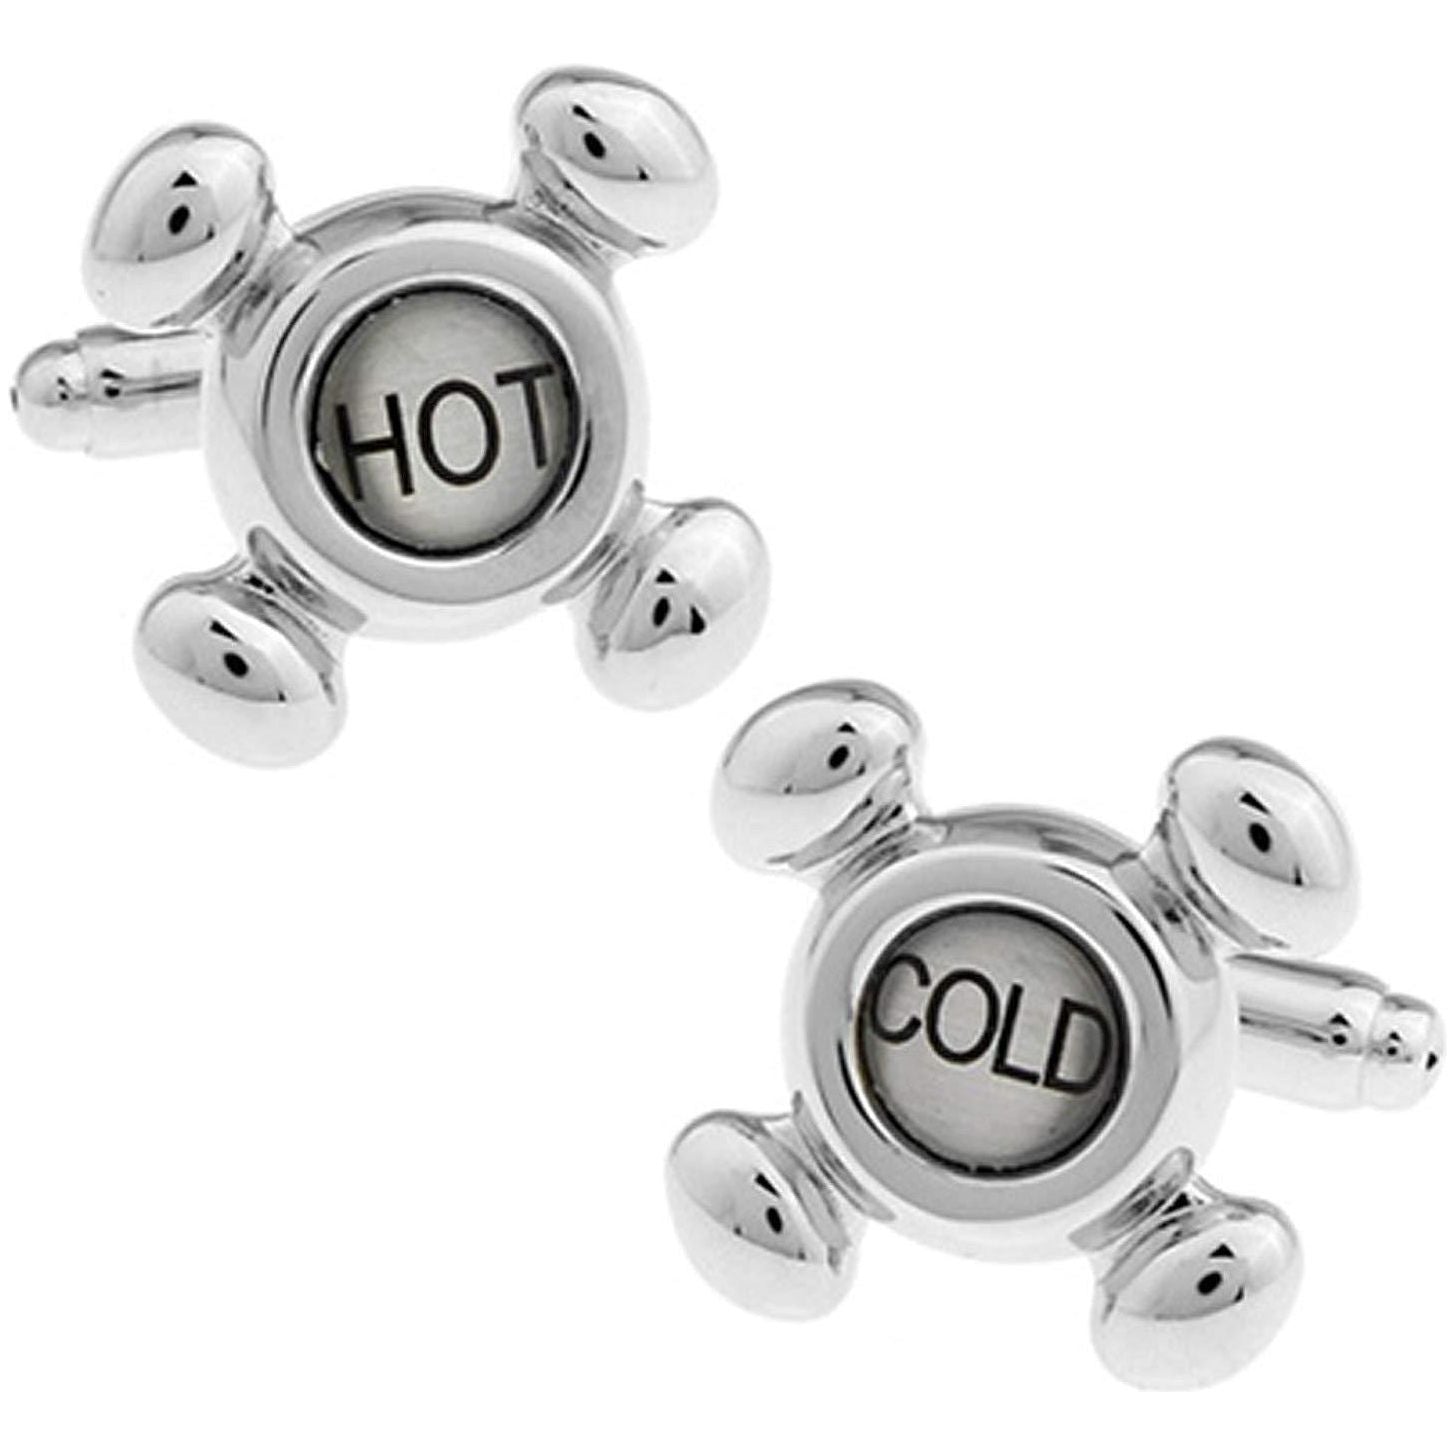 Hot and Cold Tap Cufflinks - Ashton and Finch